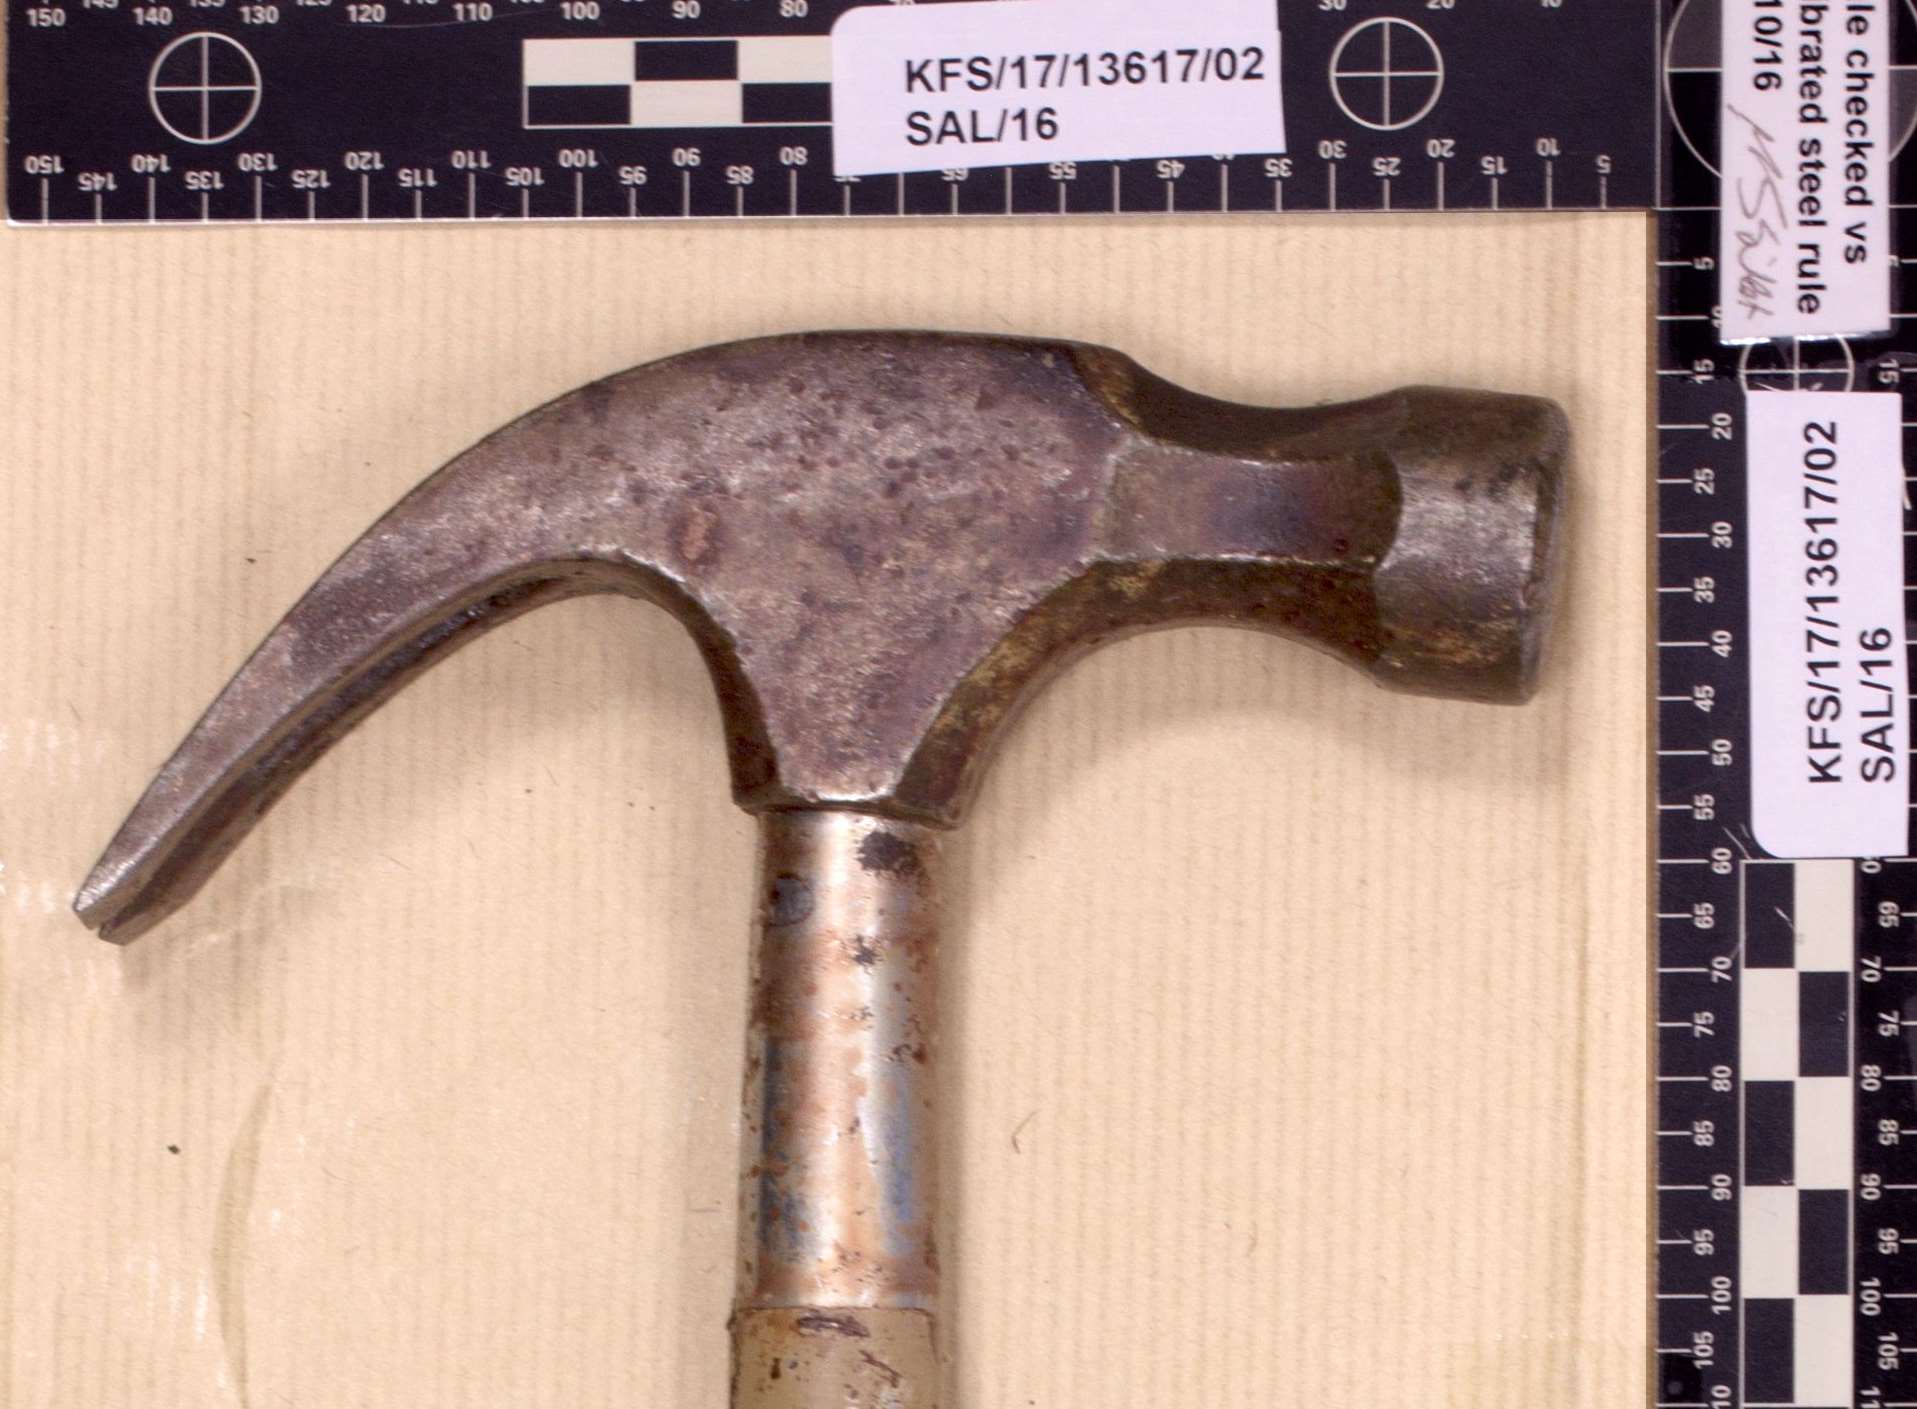 The hammer seized from the scene of the murder